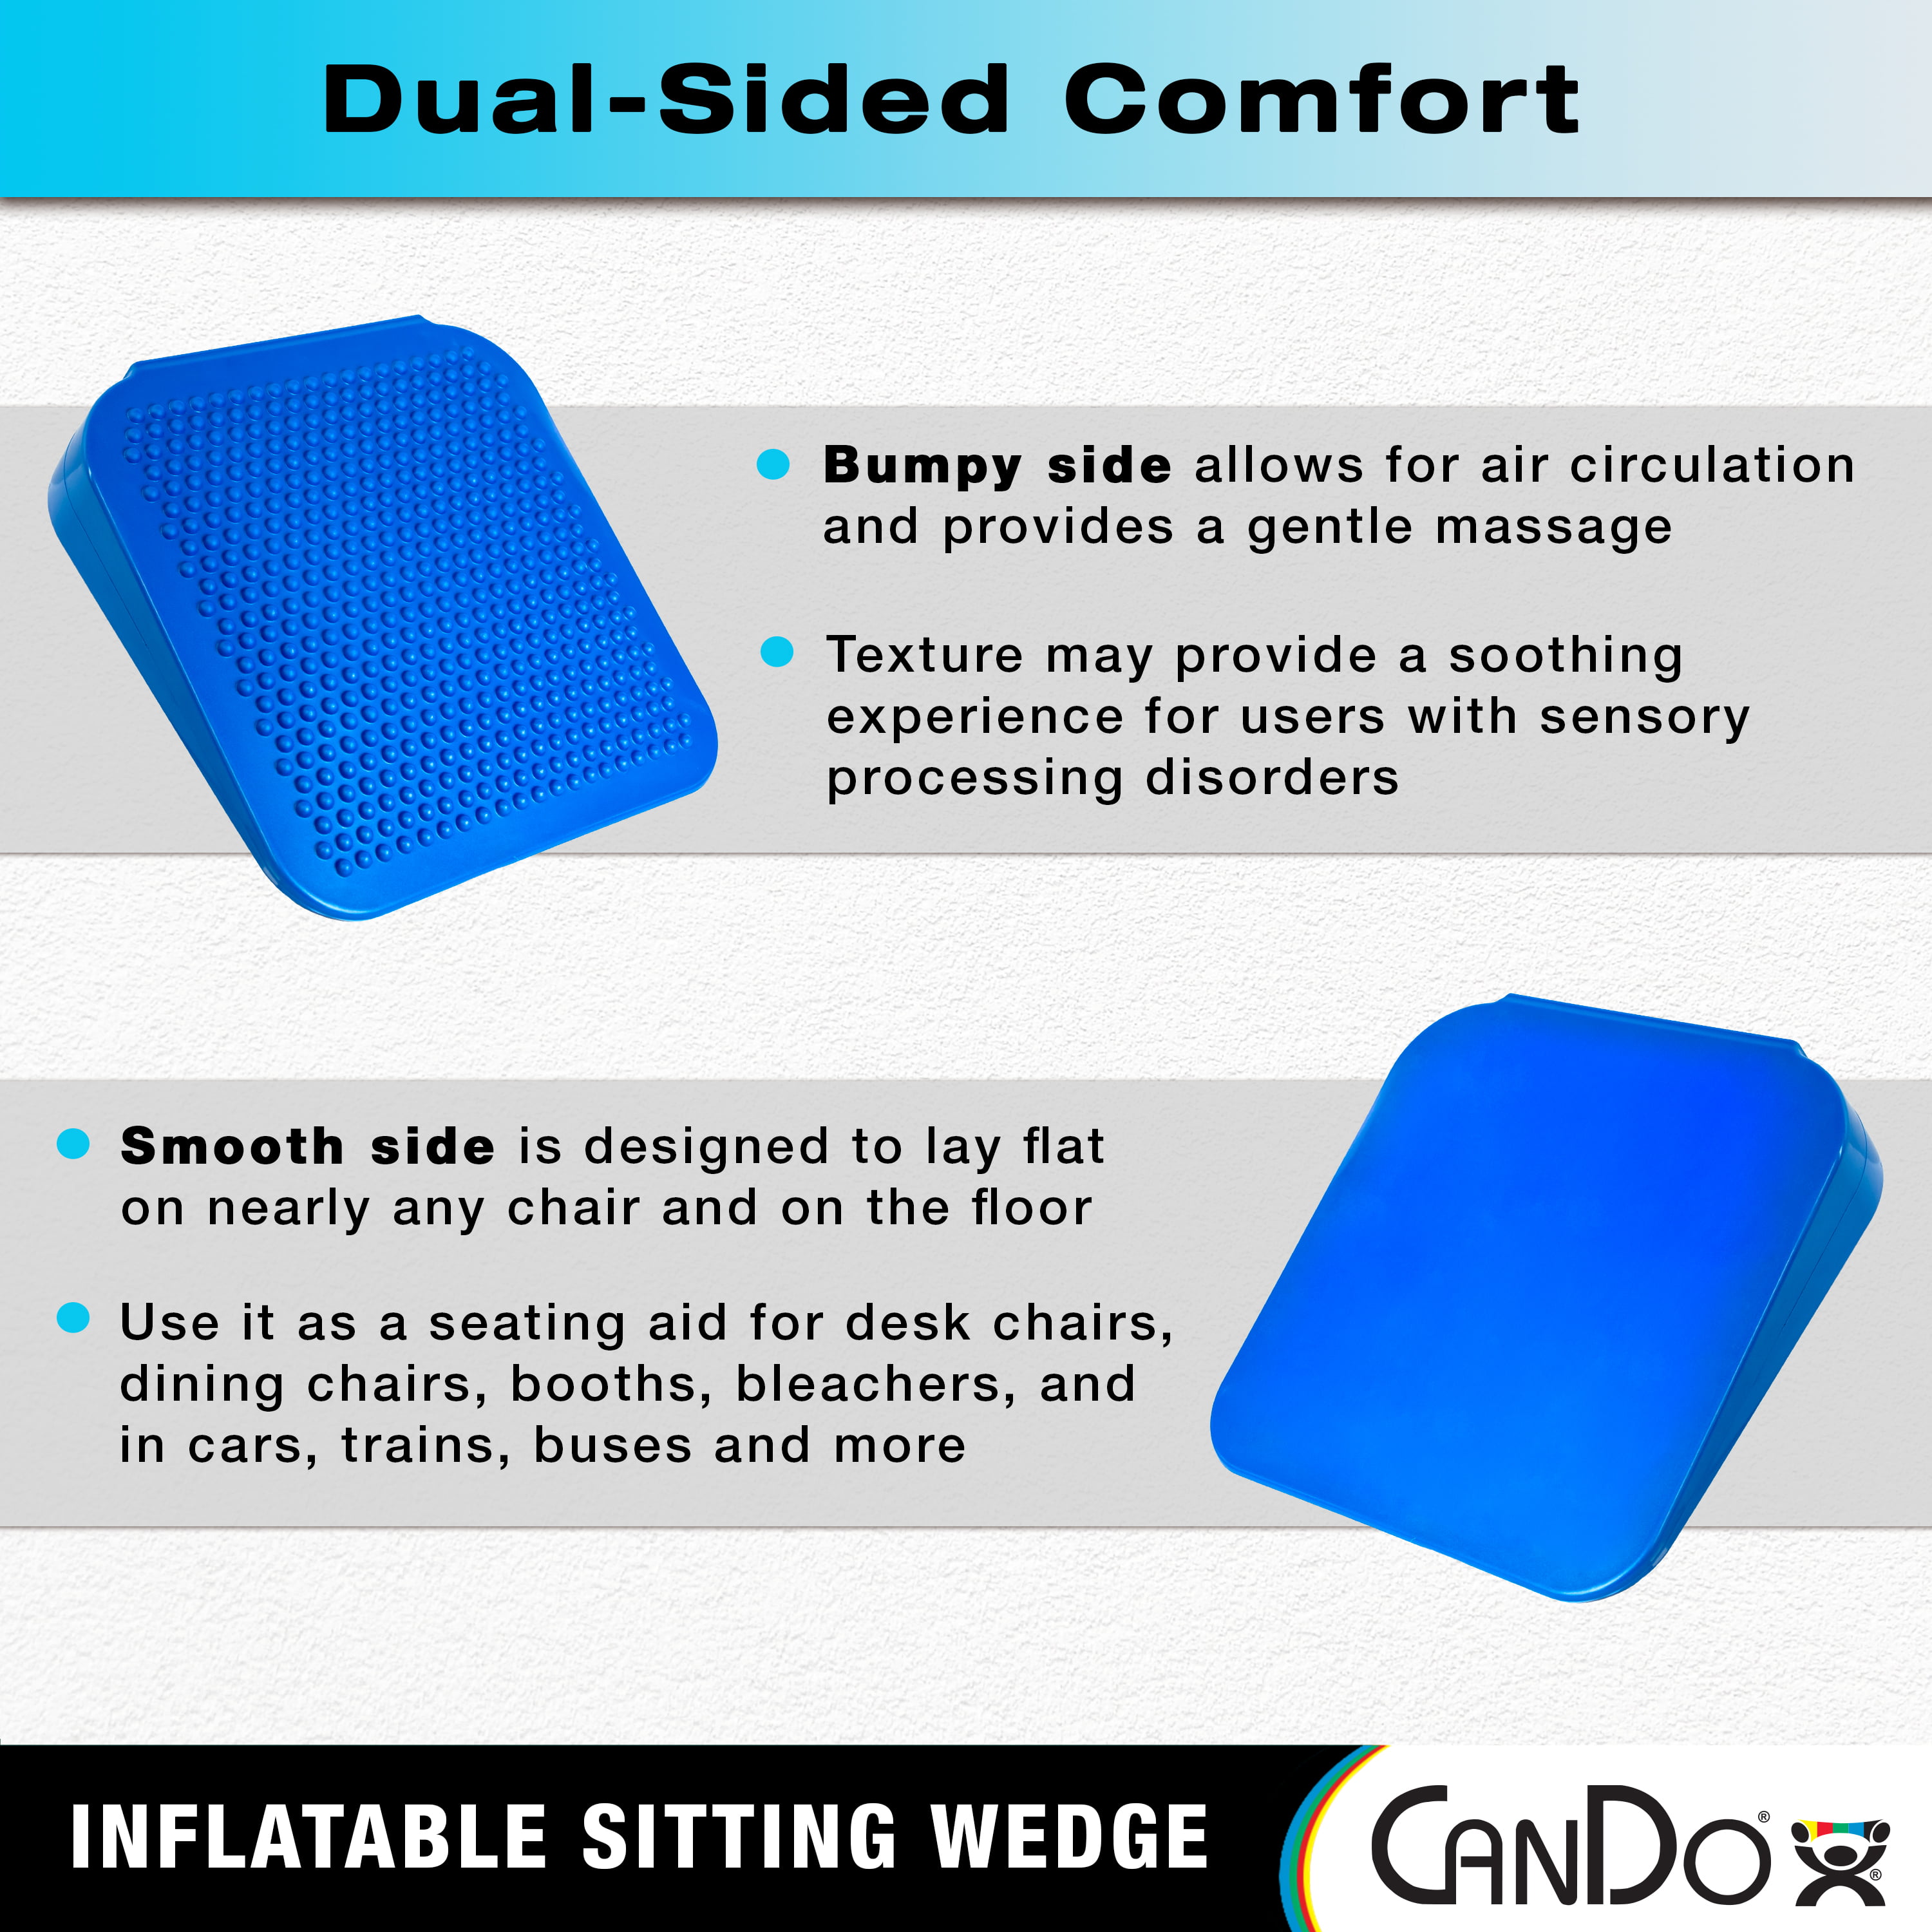 Back Wedge Cushion for Support, Stress Relief, and Posture When Sitting in Chair or Car (Large Size 15)